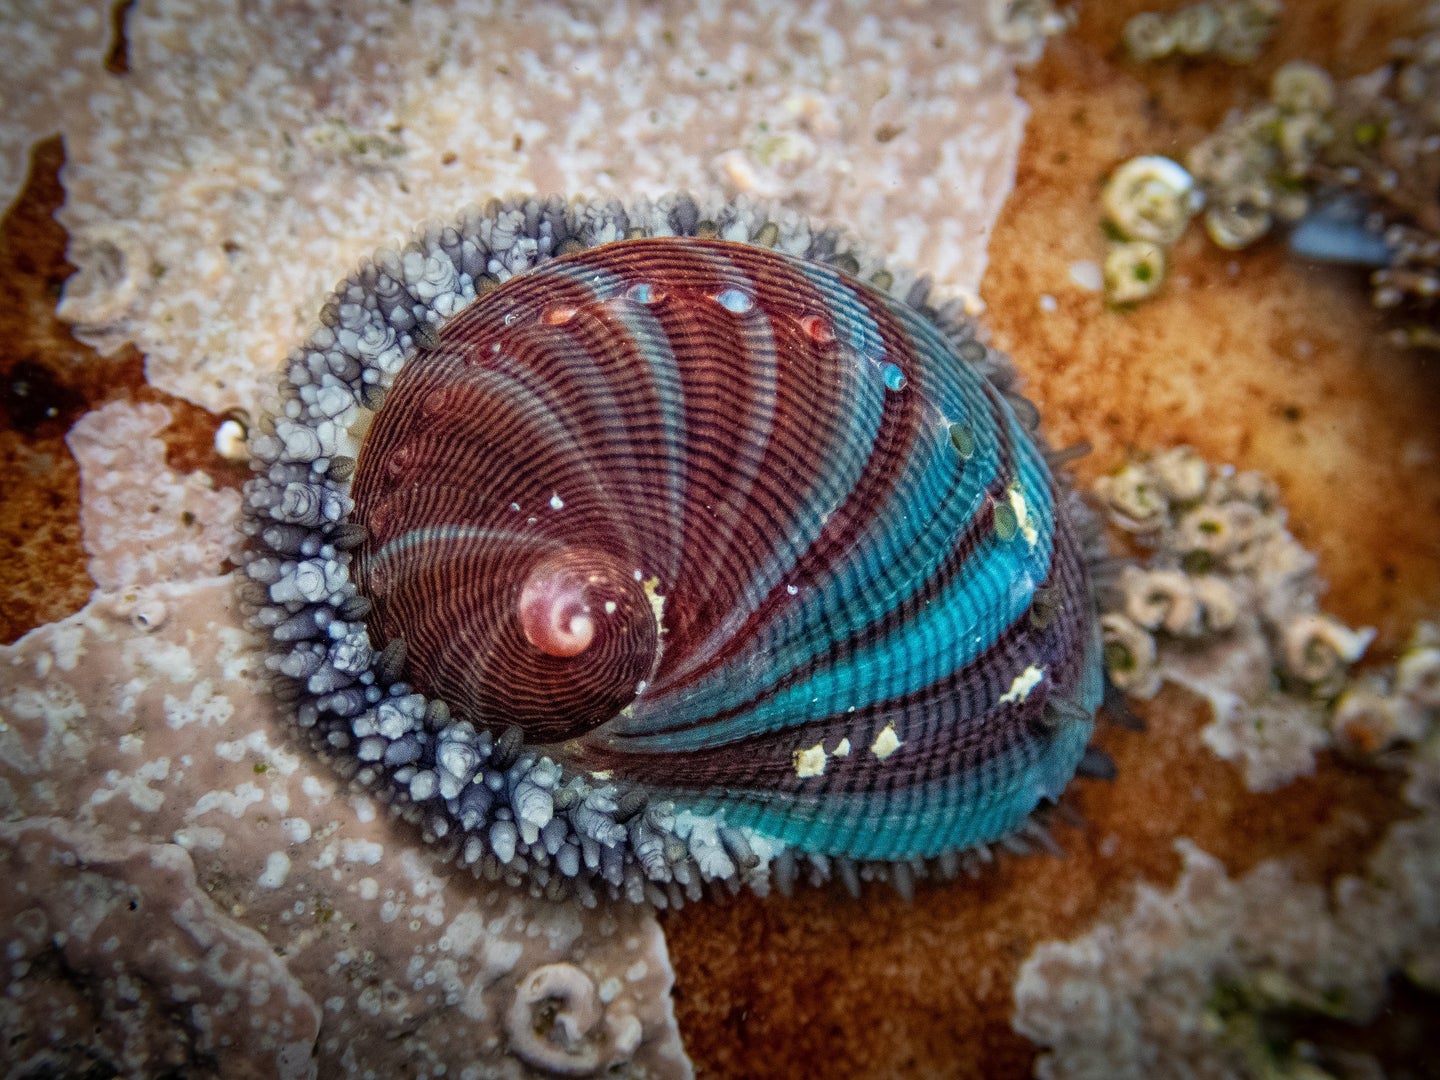 Abalone with maroon and teal shell resting on a rock in an Underwater Wild